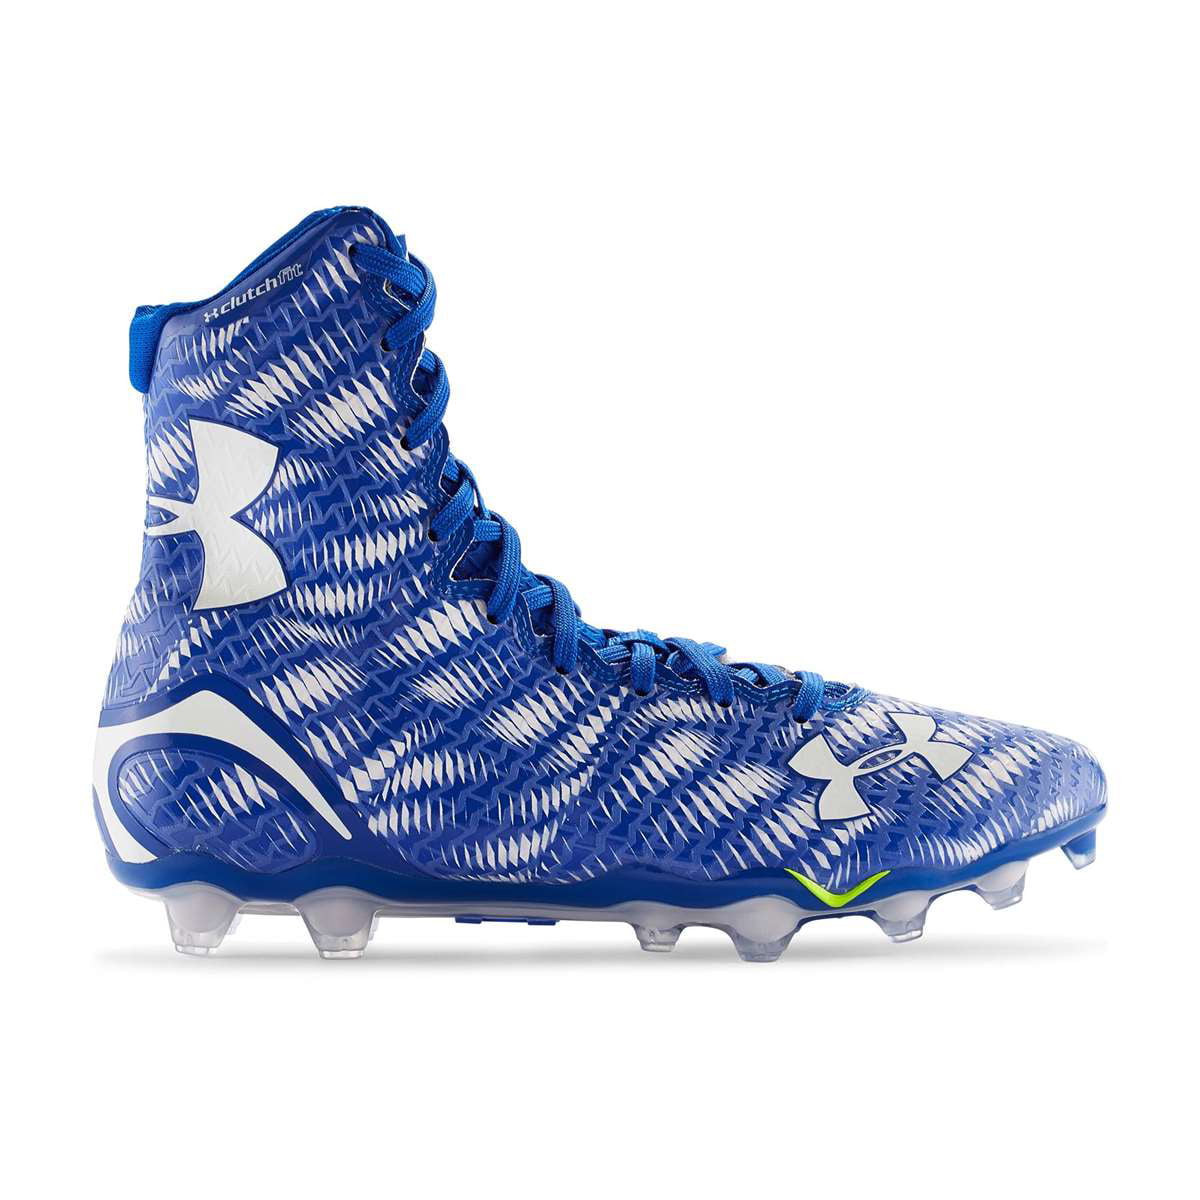 Blue Under Armour Football Cleat 